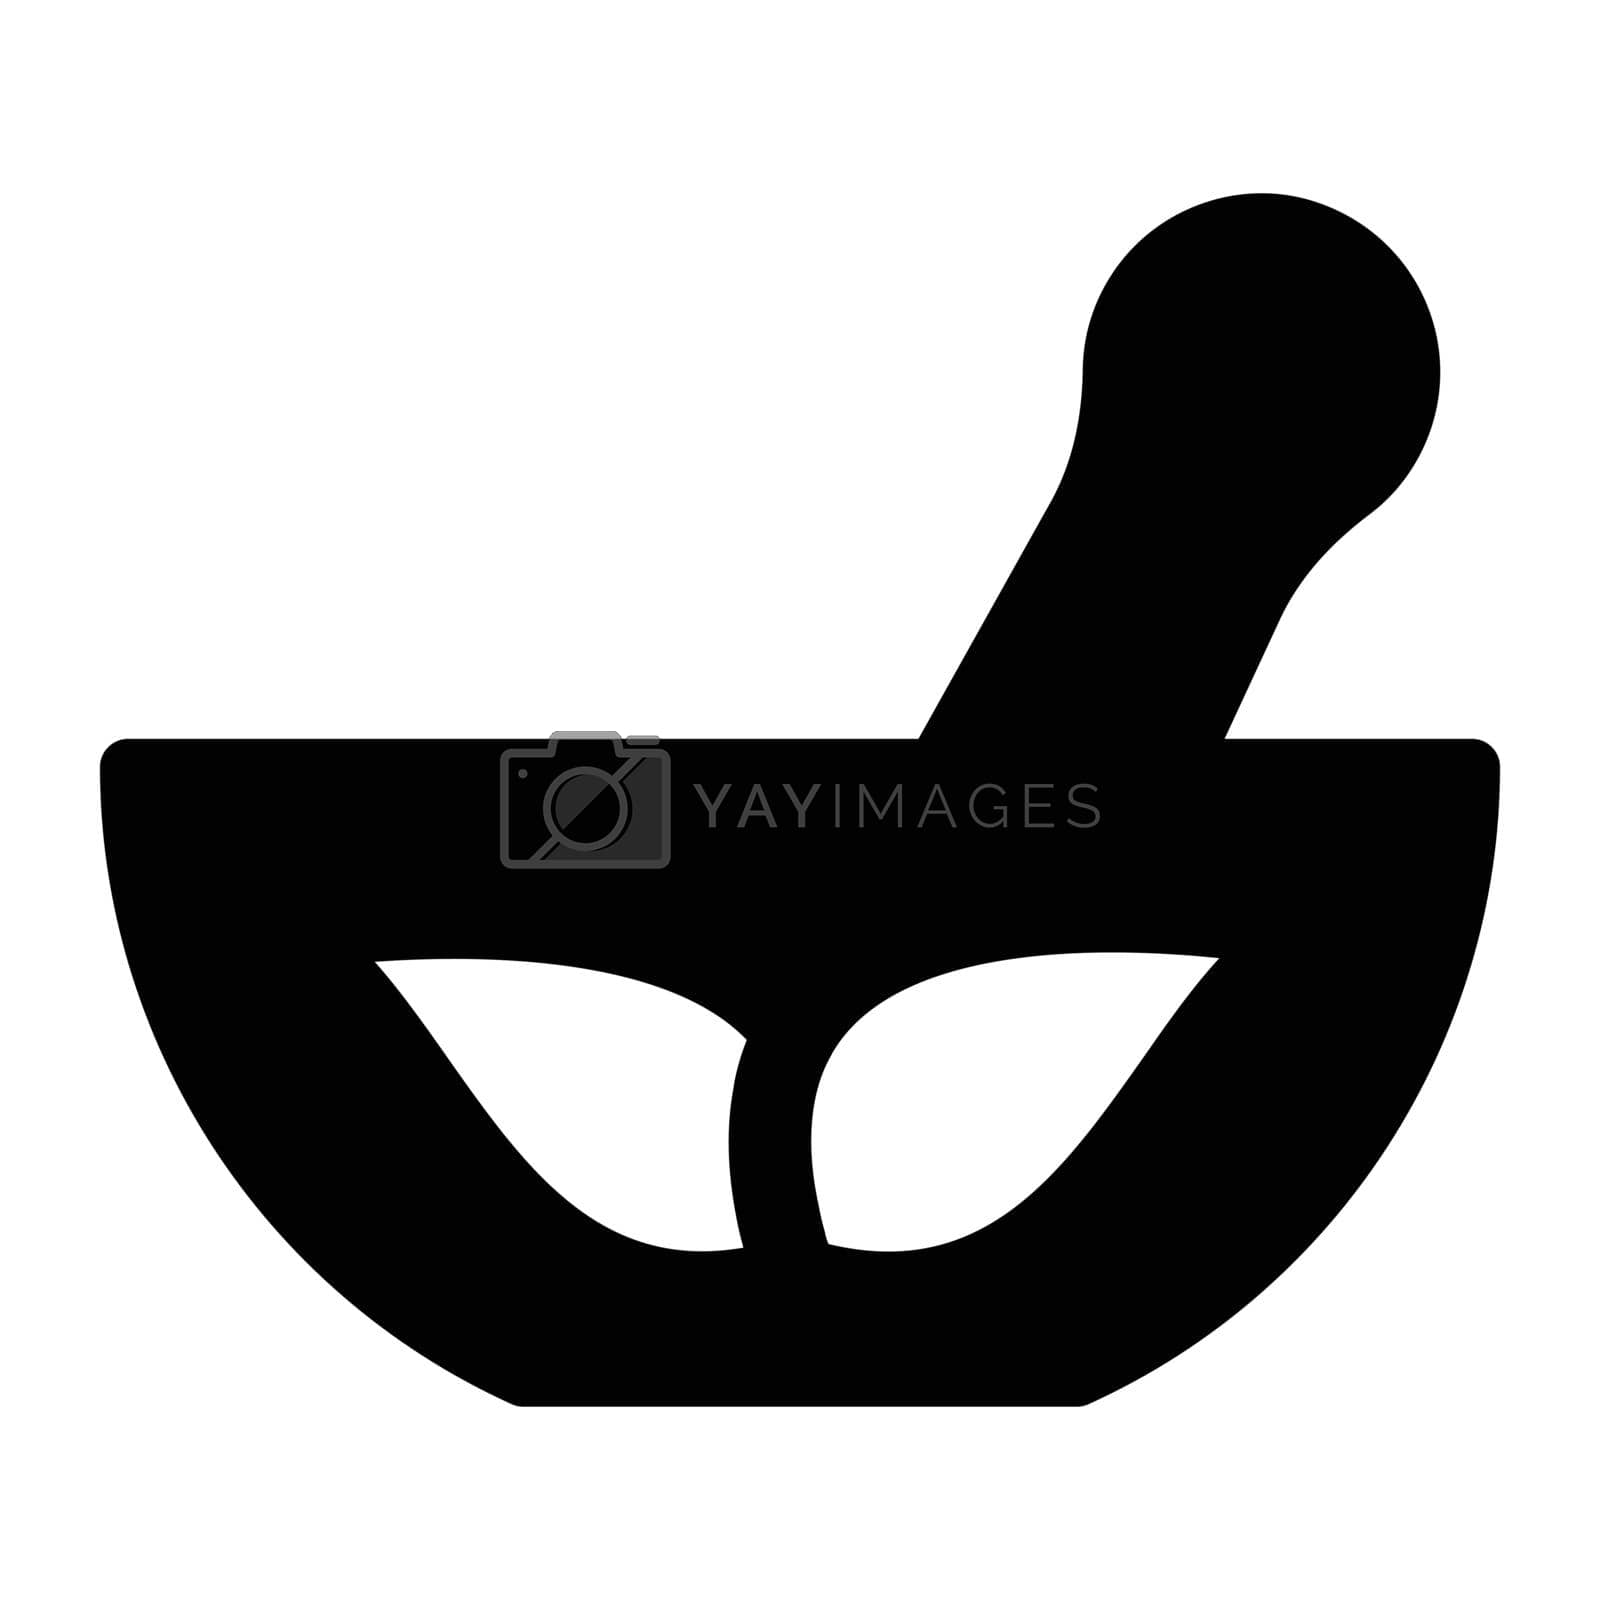 Royalty free image of bowl by FlaticonsDesign